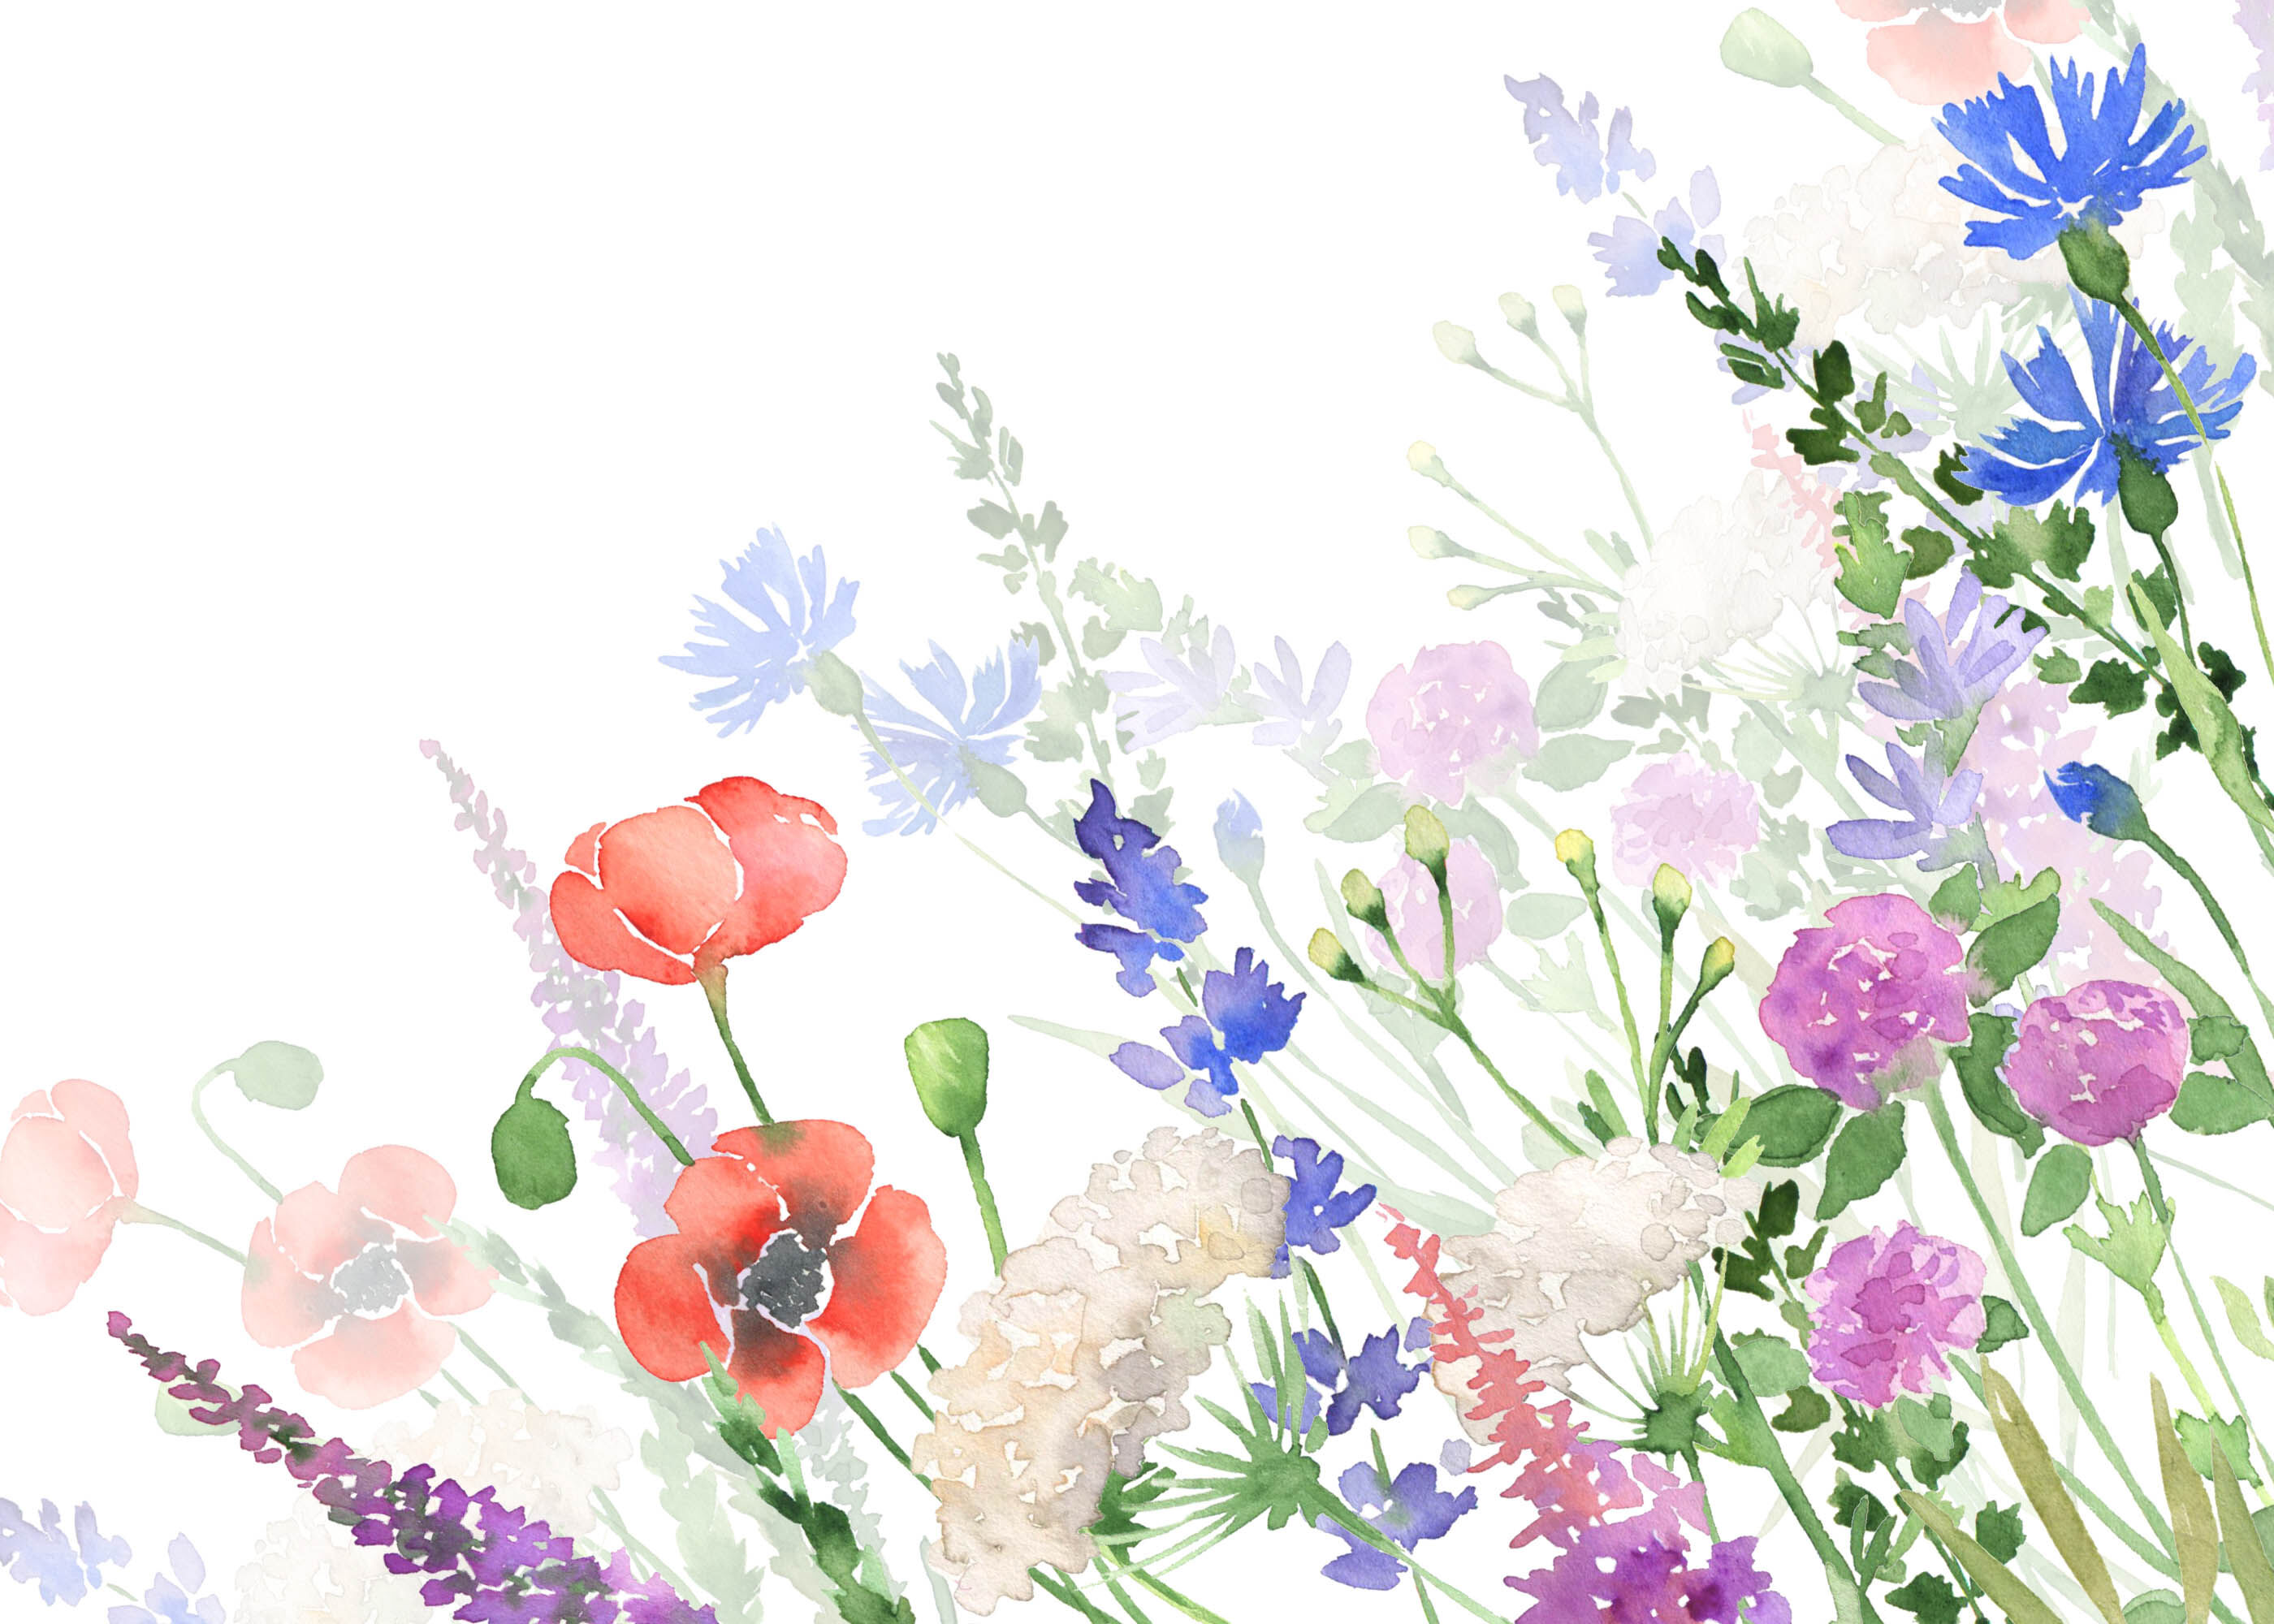 Watercolor Wildflowers Clipart Botanical Floral Files Flowers Clip Art